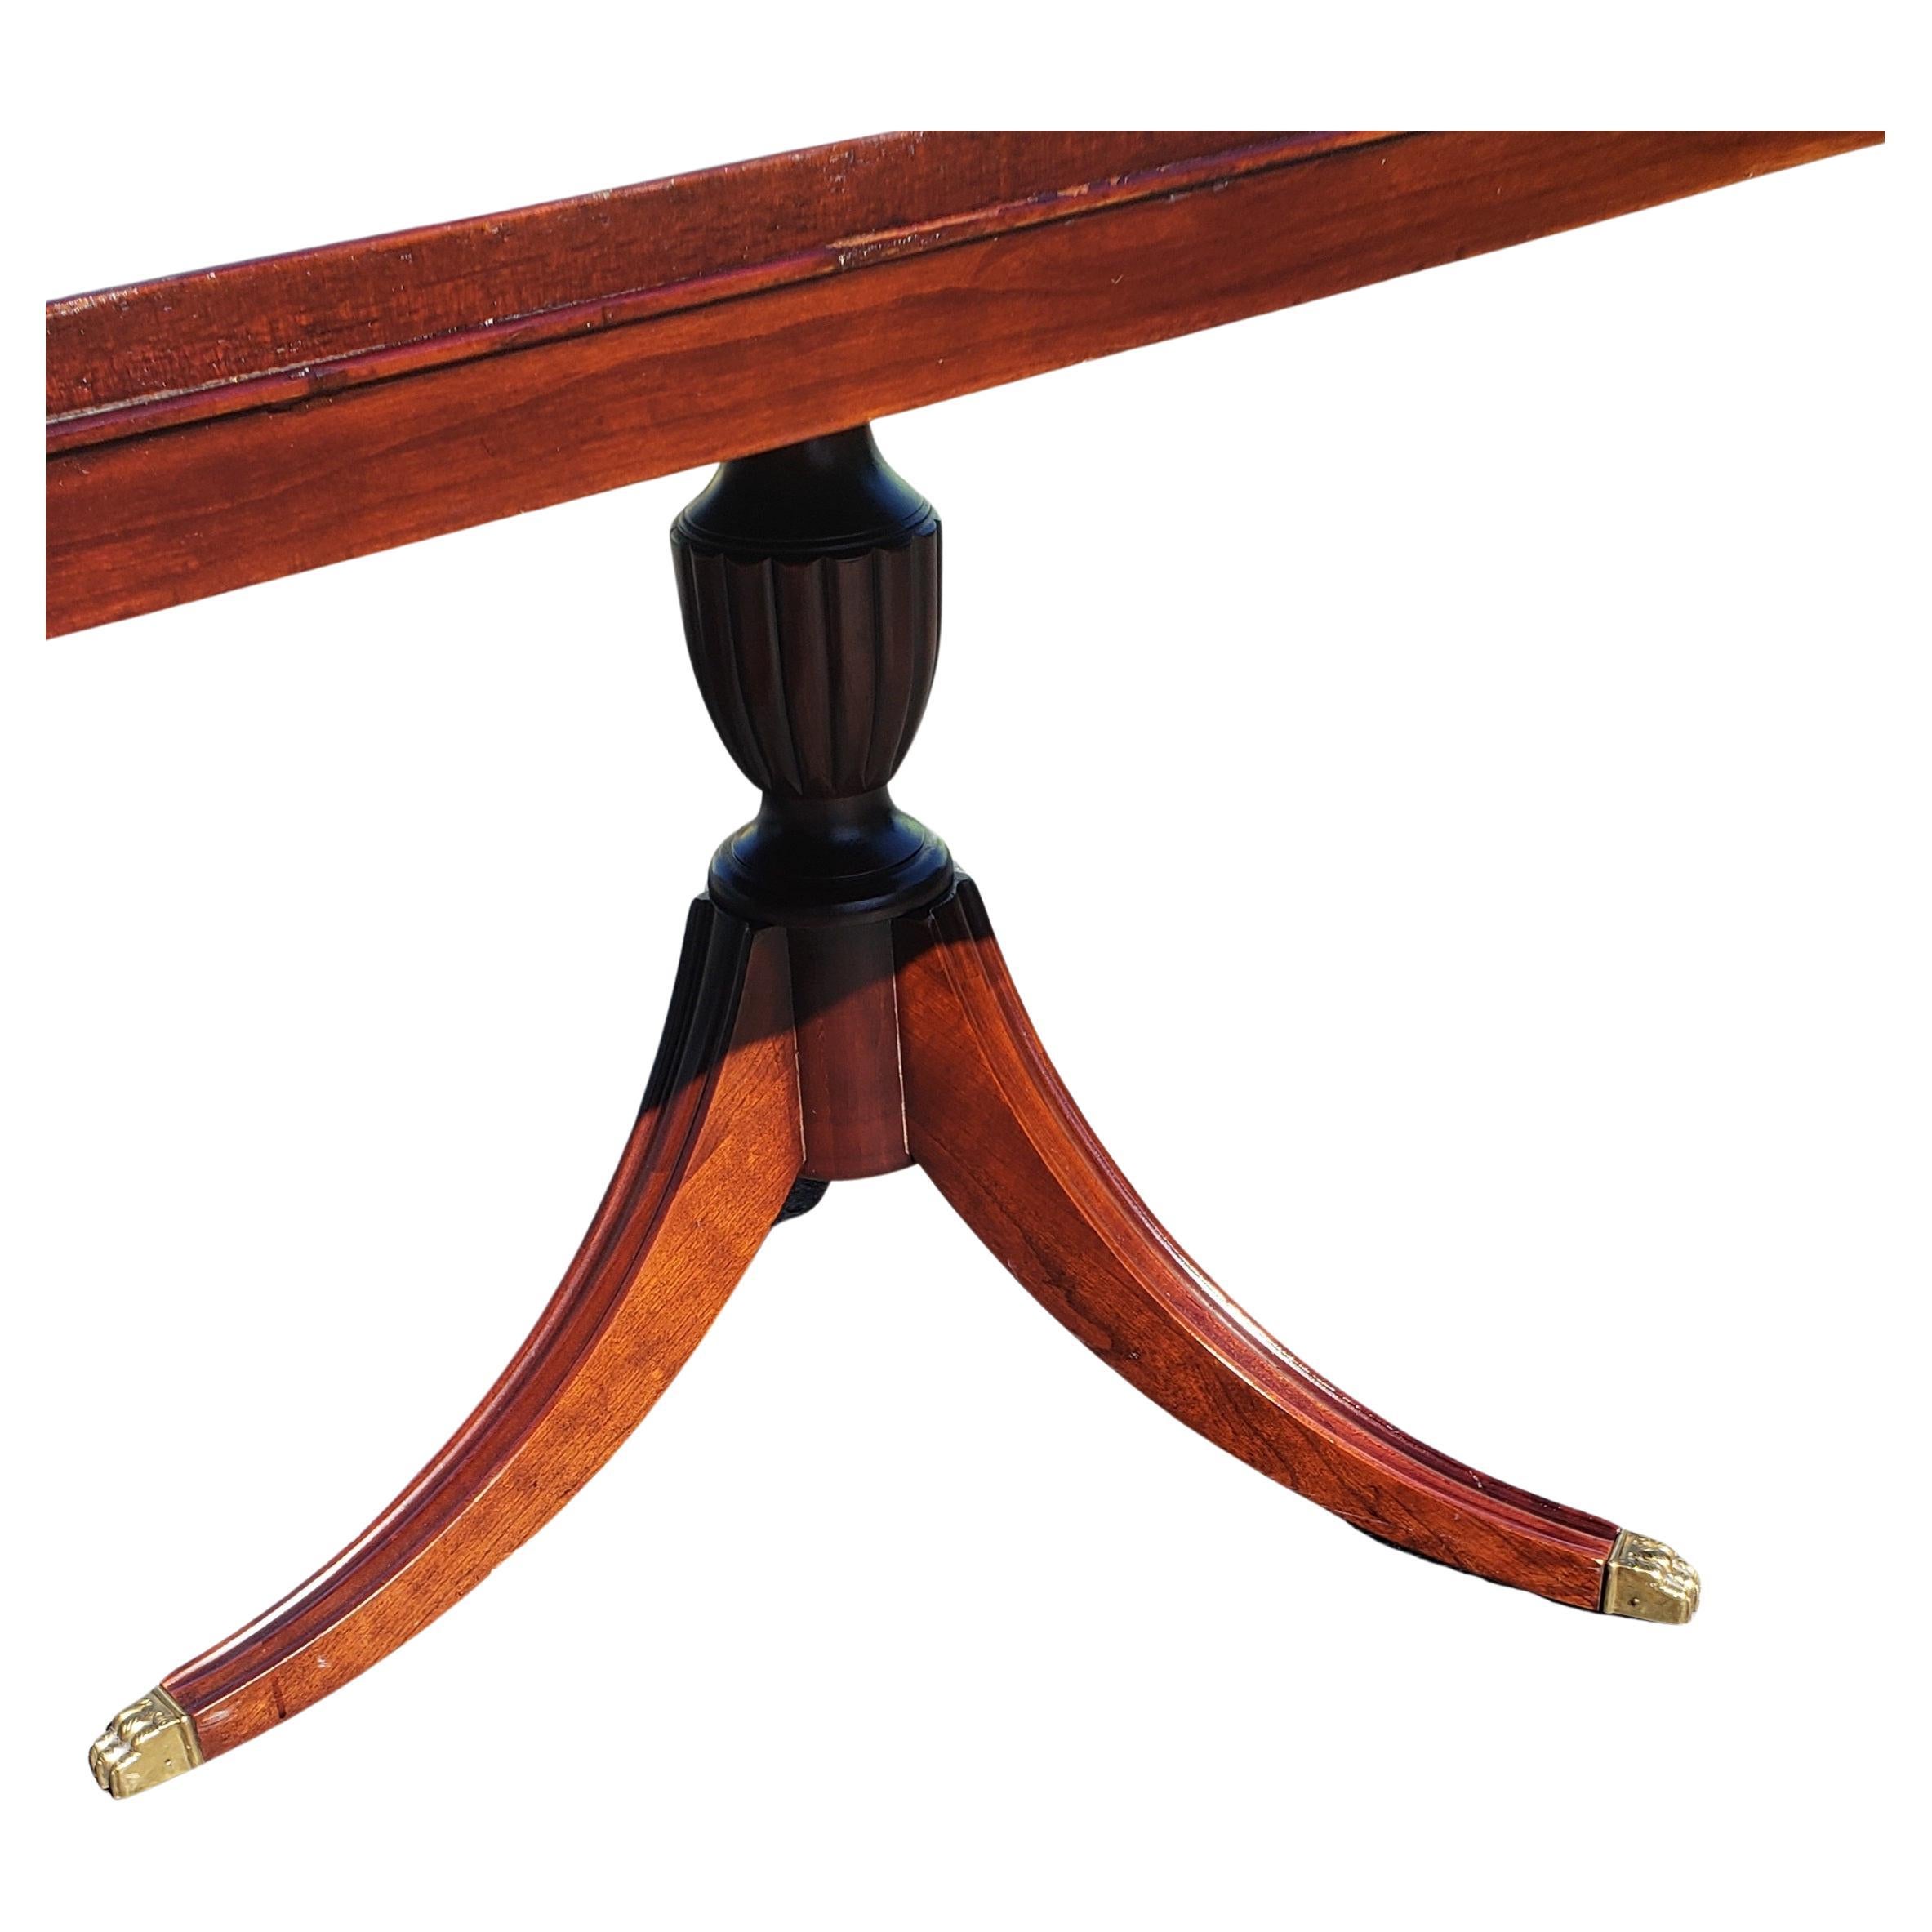 A Regency crossbanded Mahogany and satinwood inlay double pedestal extension dining table measuring 97.5